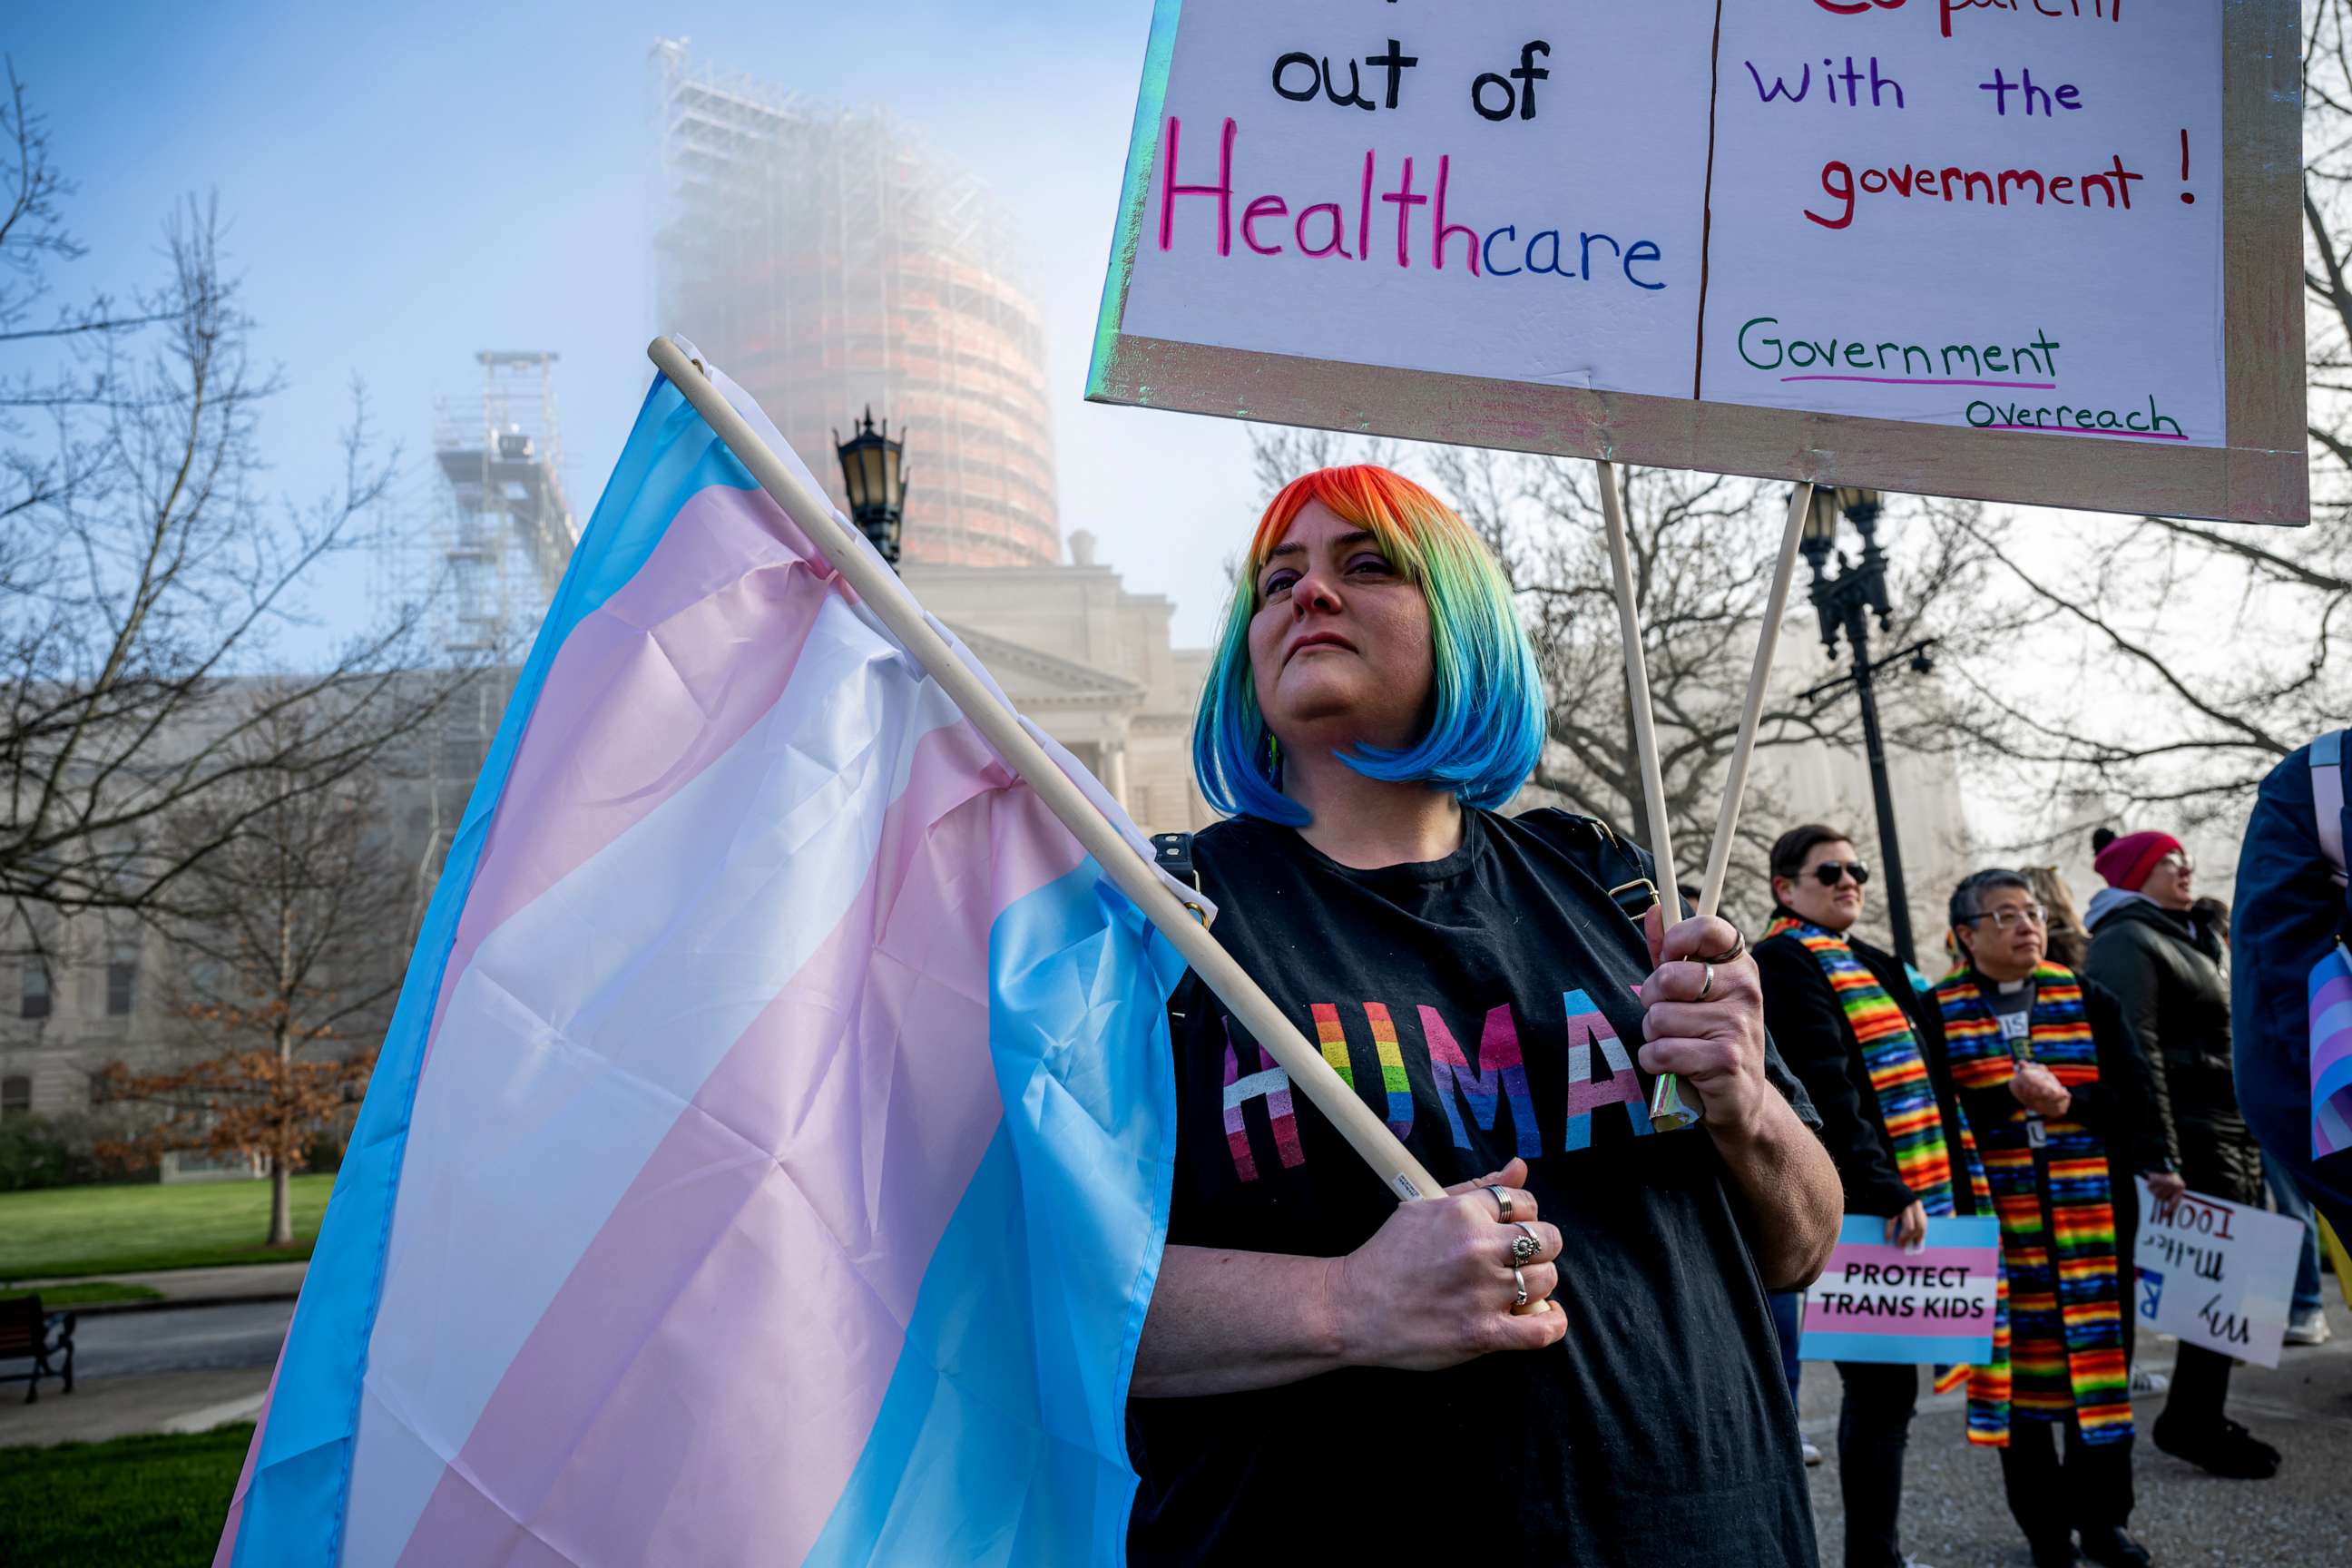 PHOTO: Sarah Newton stands with a trans pride flag during a rally to protest the passing of SB 150 on March 29, 2023 at the Kentucky State Capitol in Frankfort, Kentucky.